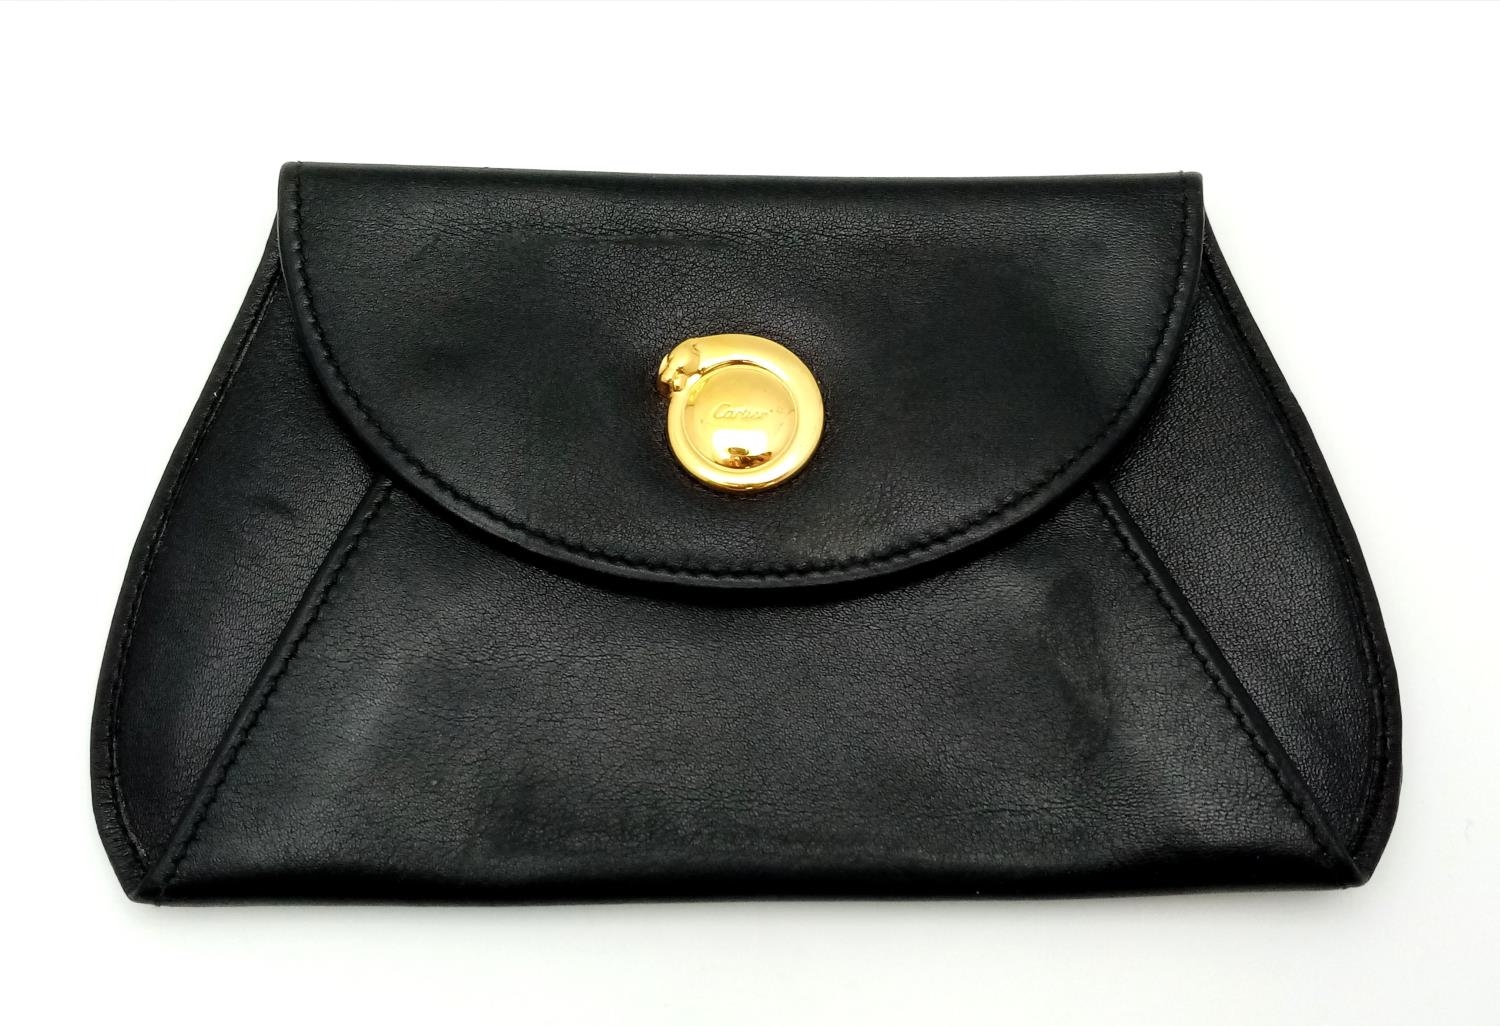 A Cartier Black Panther Coin Pouch. Leather exterior with gold-toned hardware and press stud